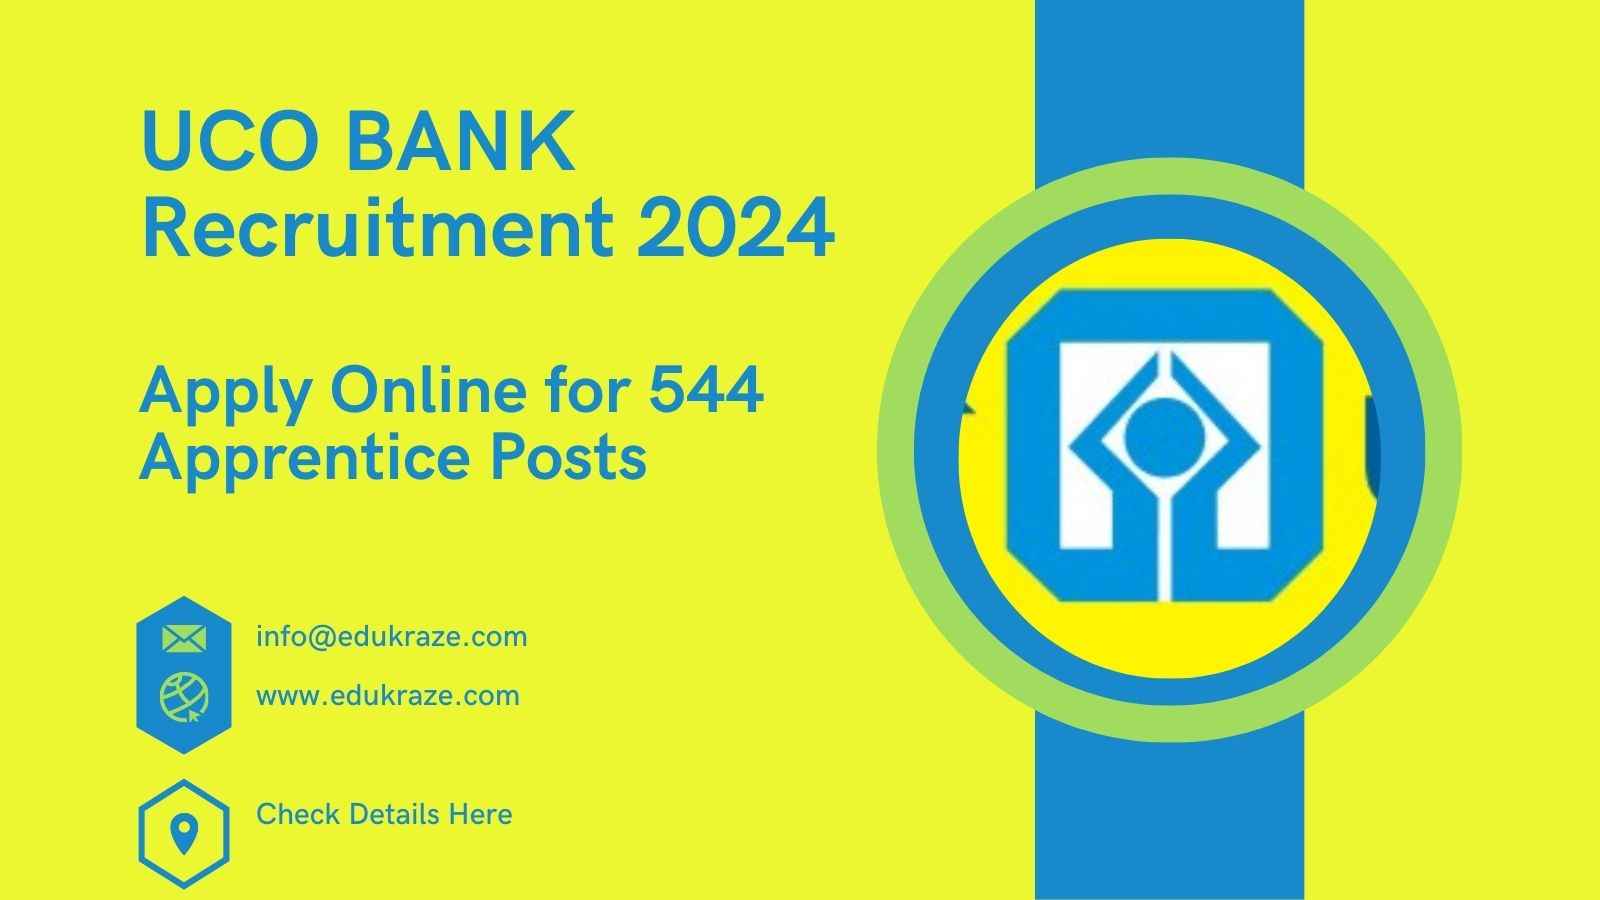 UCO Bank Recruitment 2024: Apply Online for 544 Apprentice Posts